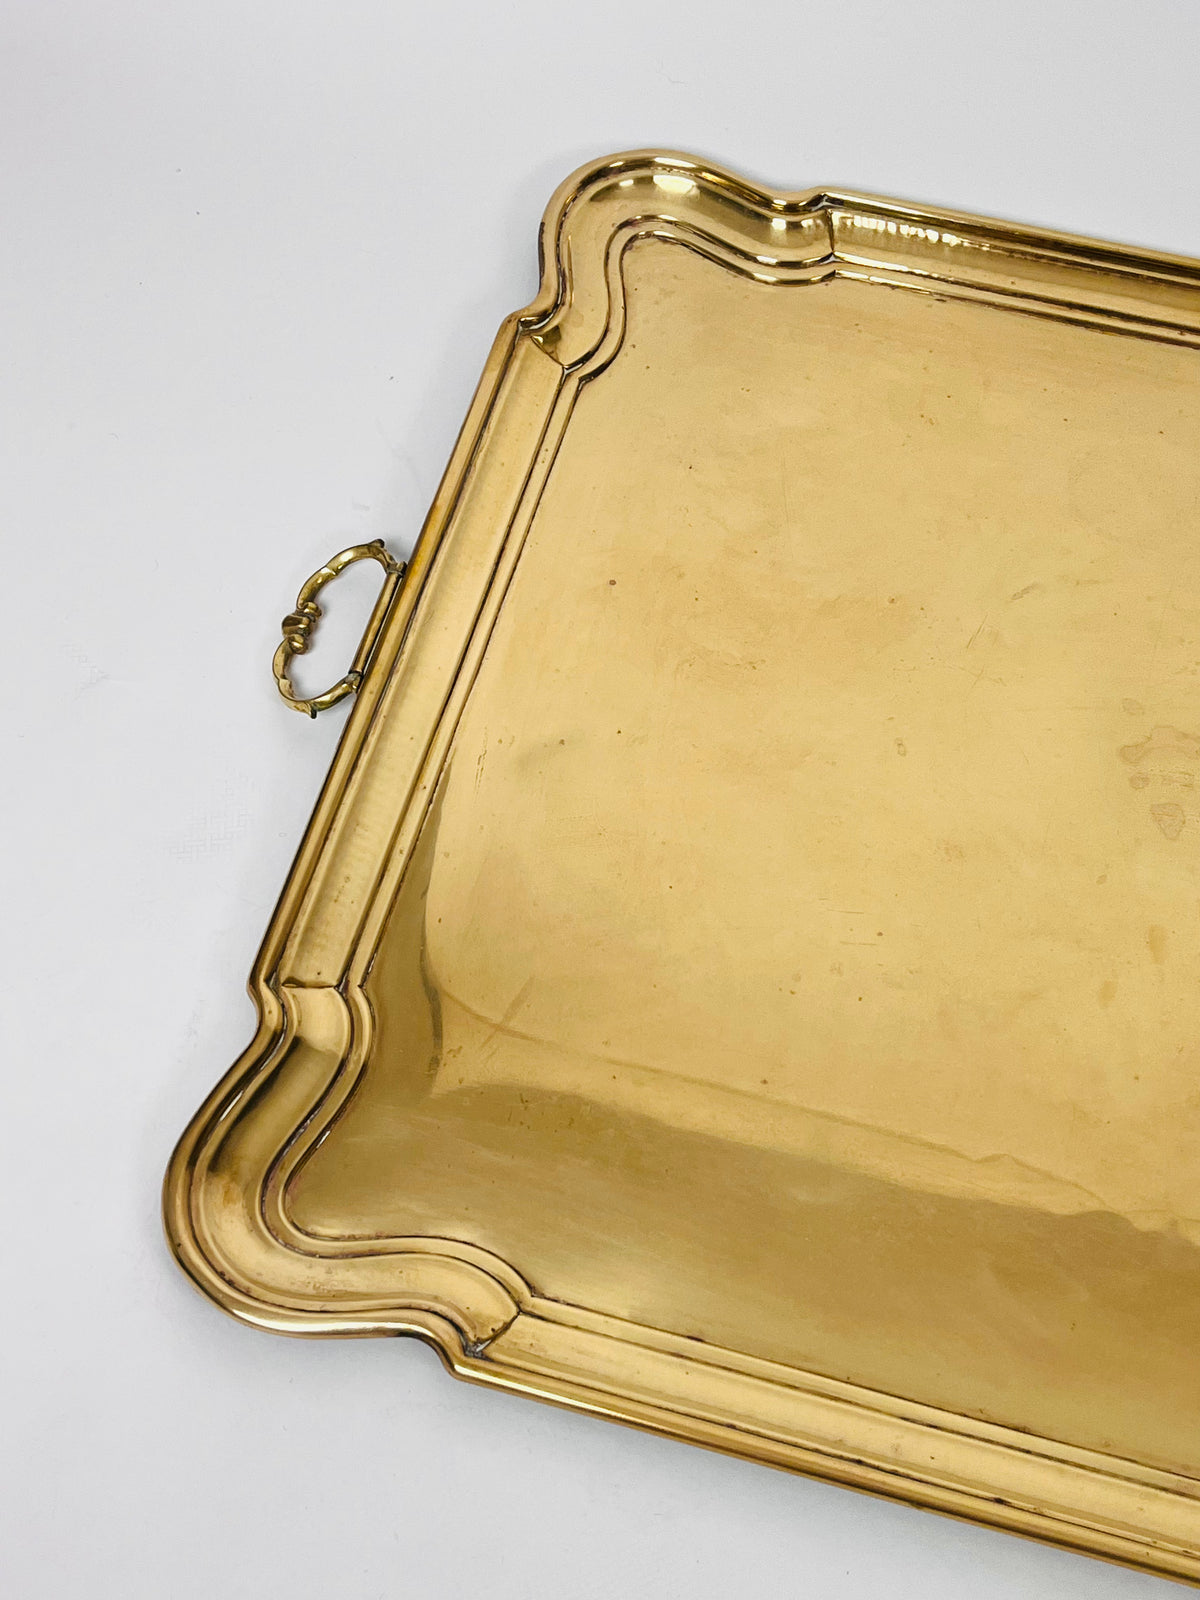 Vintage Regency Furniture Boutique - Brass Tray with Handles $65